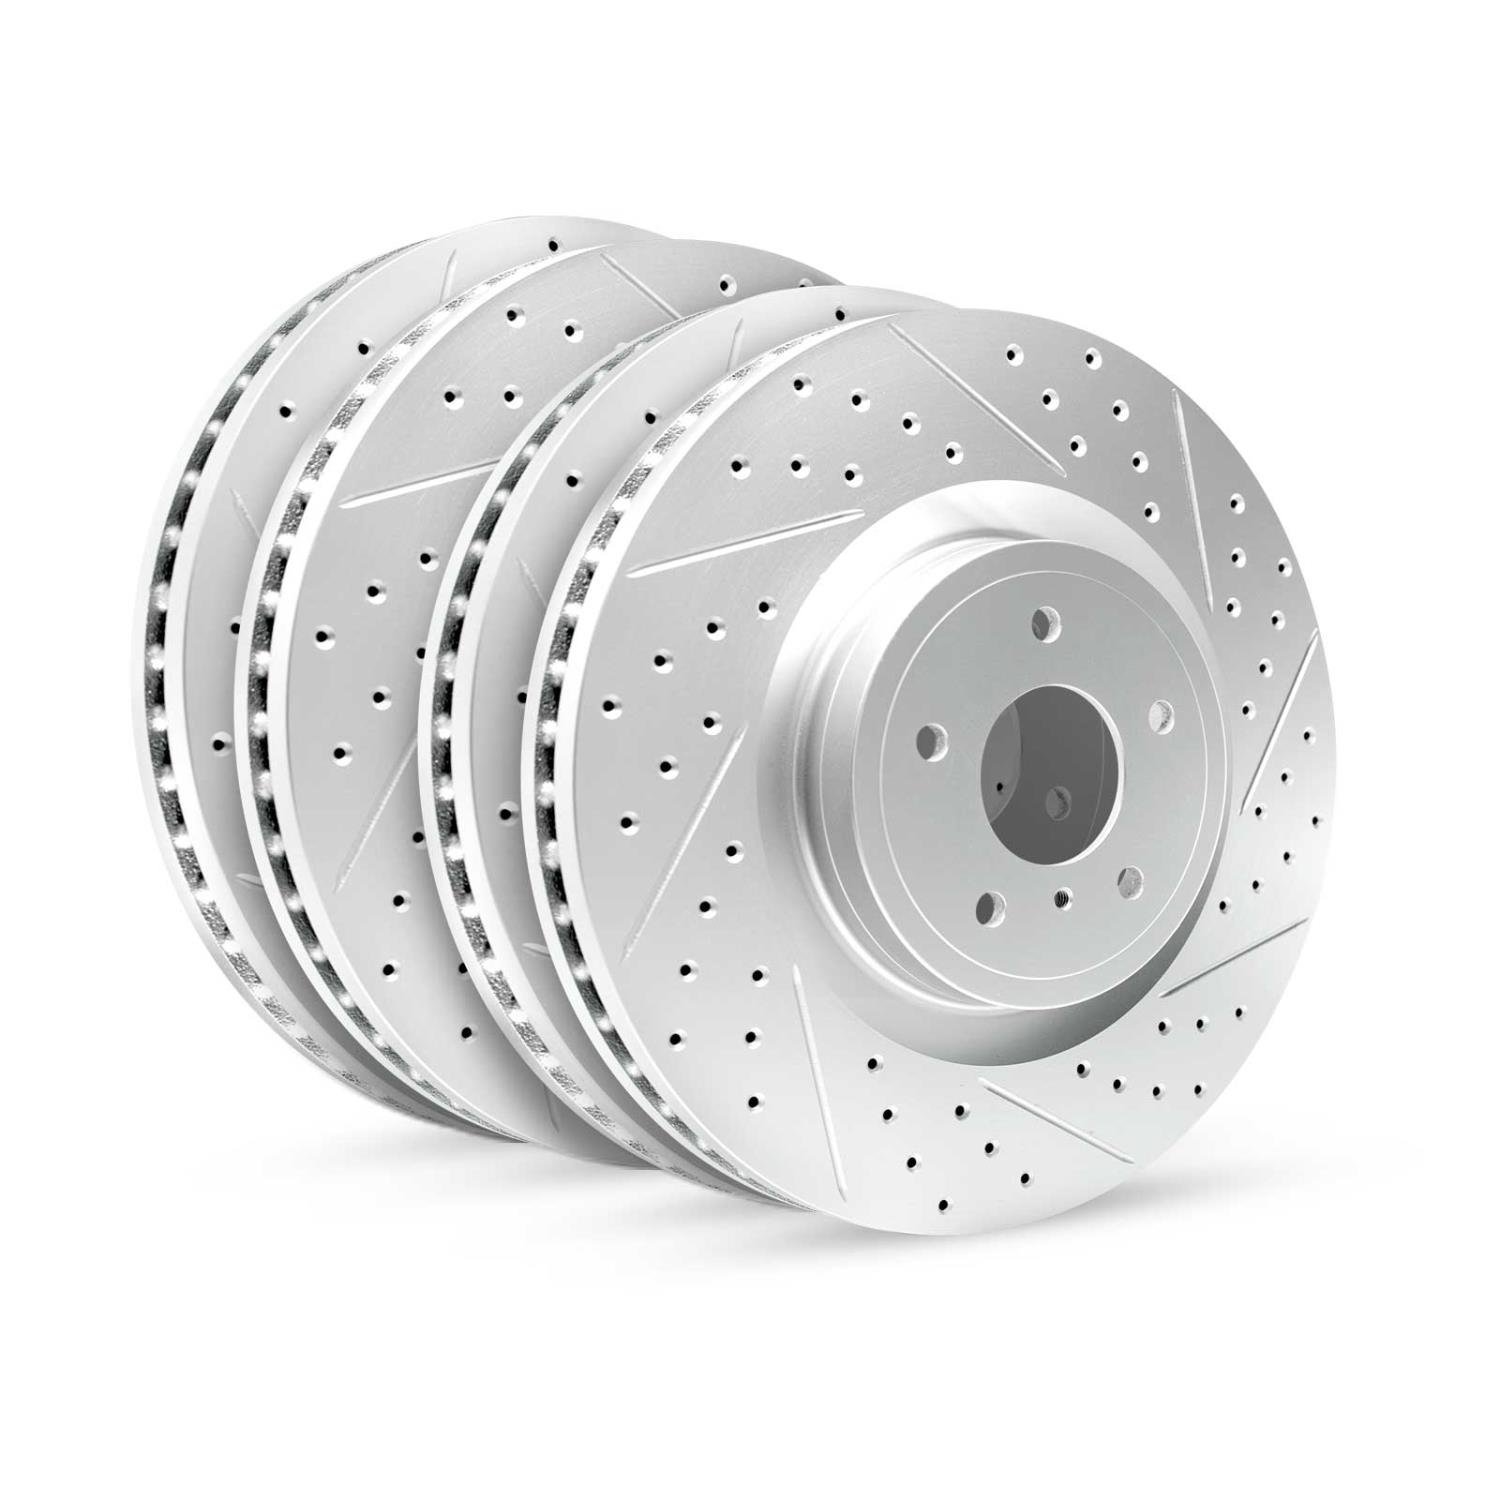 GEO-Carbon Drilled/Slotted Rotors, 2018-2020 Fits Multiple